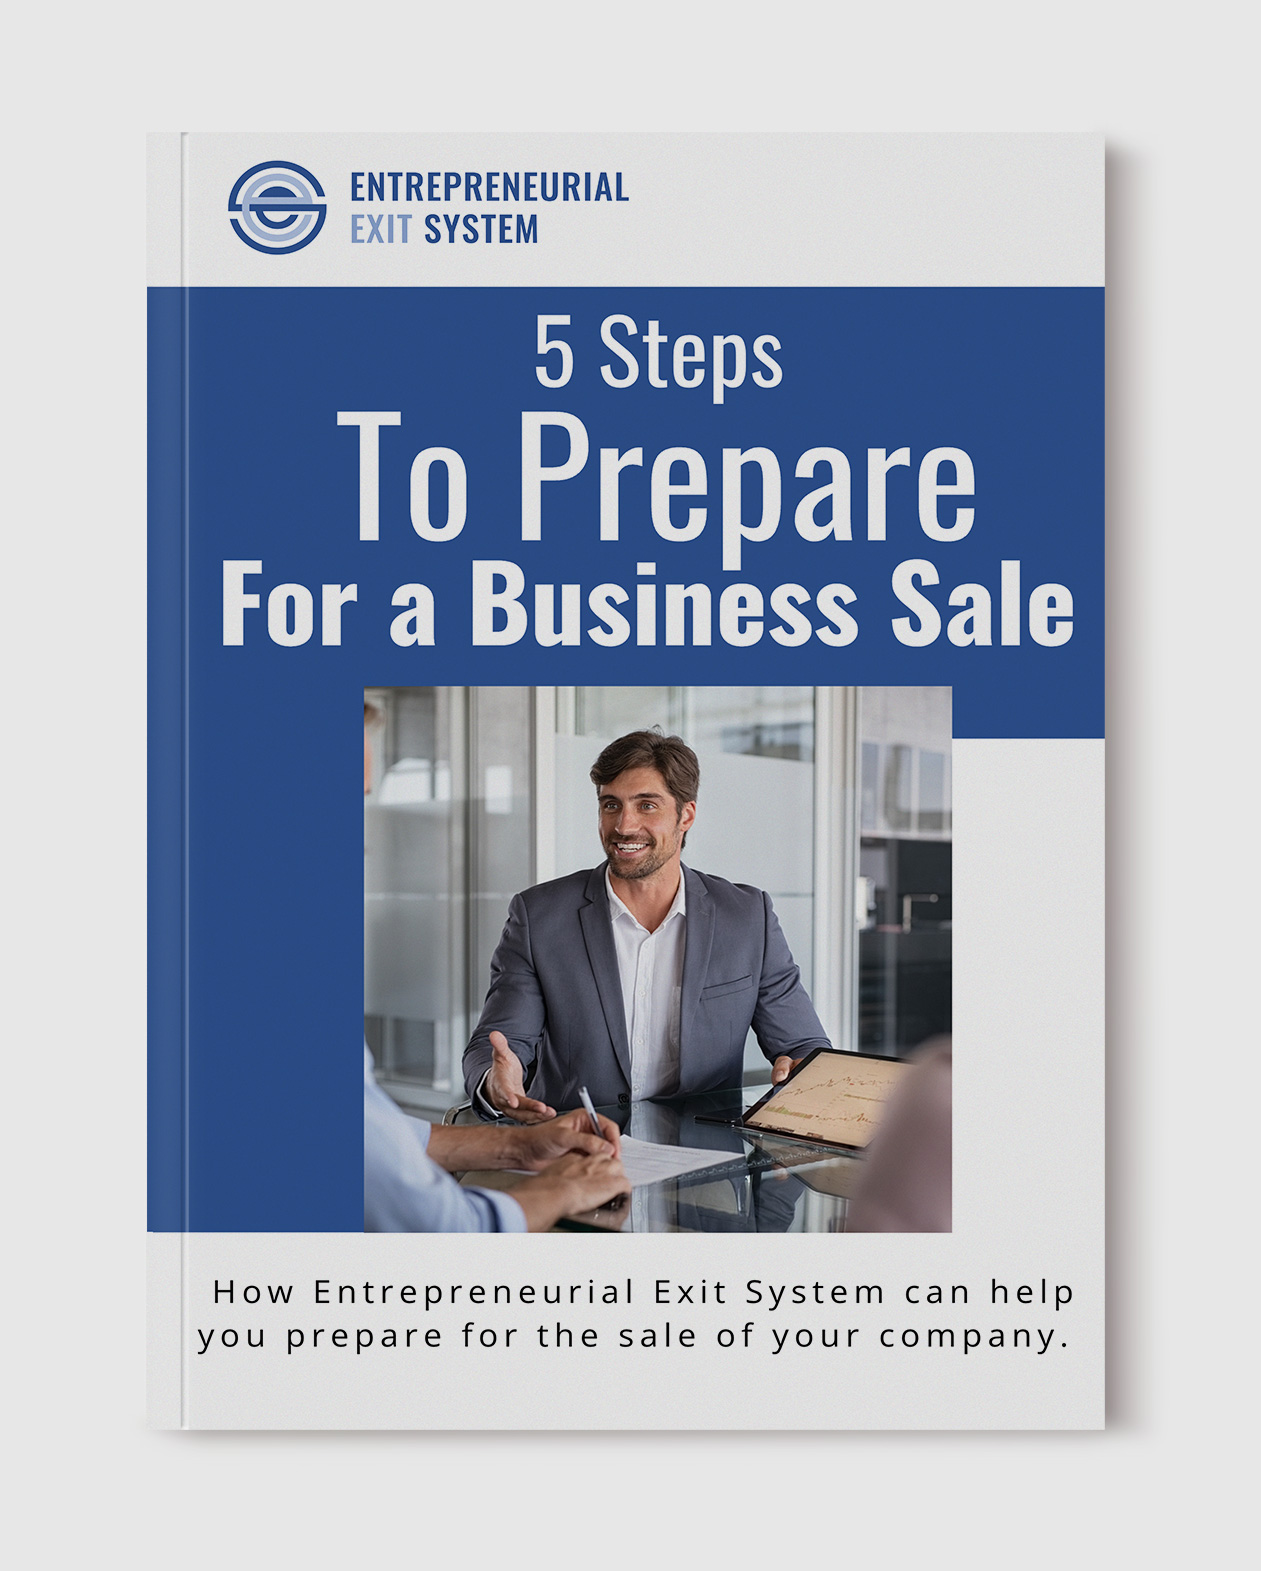 5 Steps to Prepare for a Business Sale